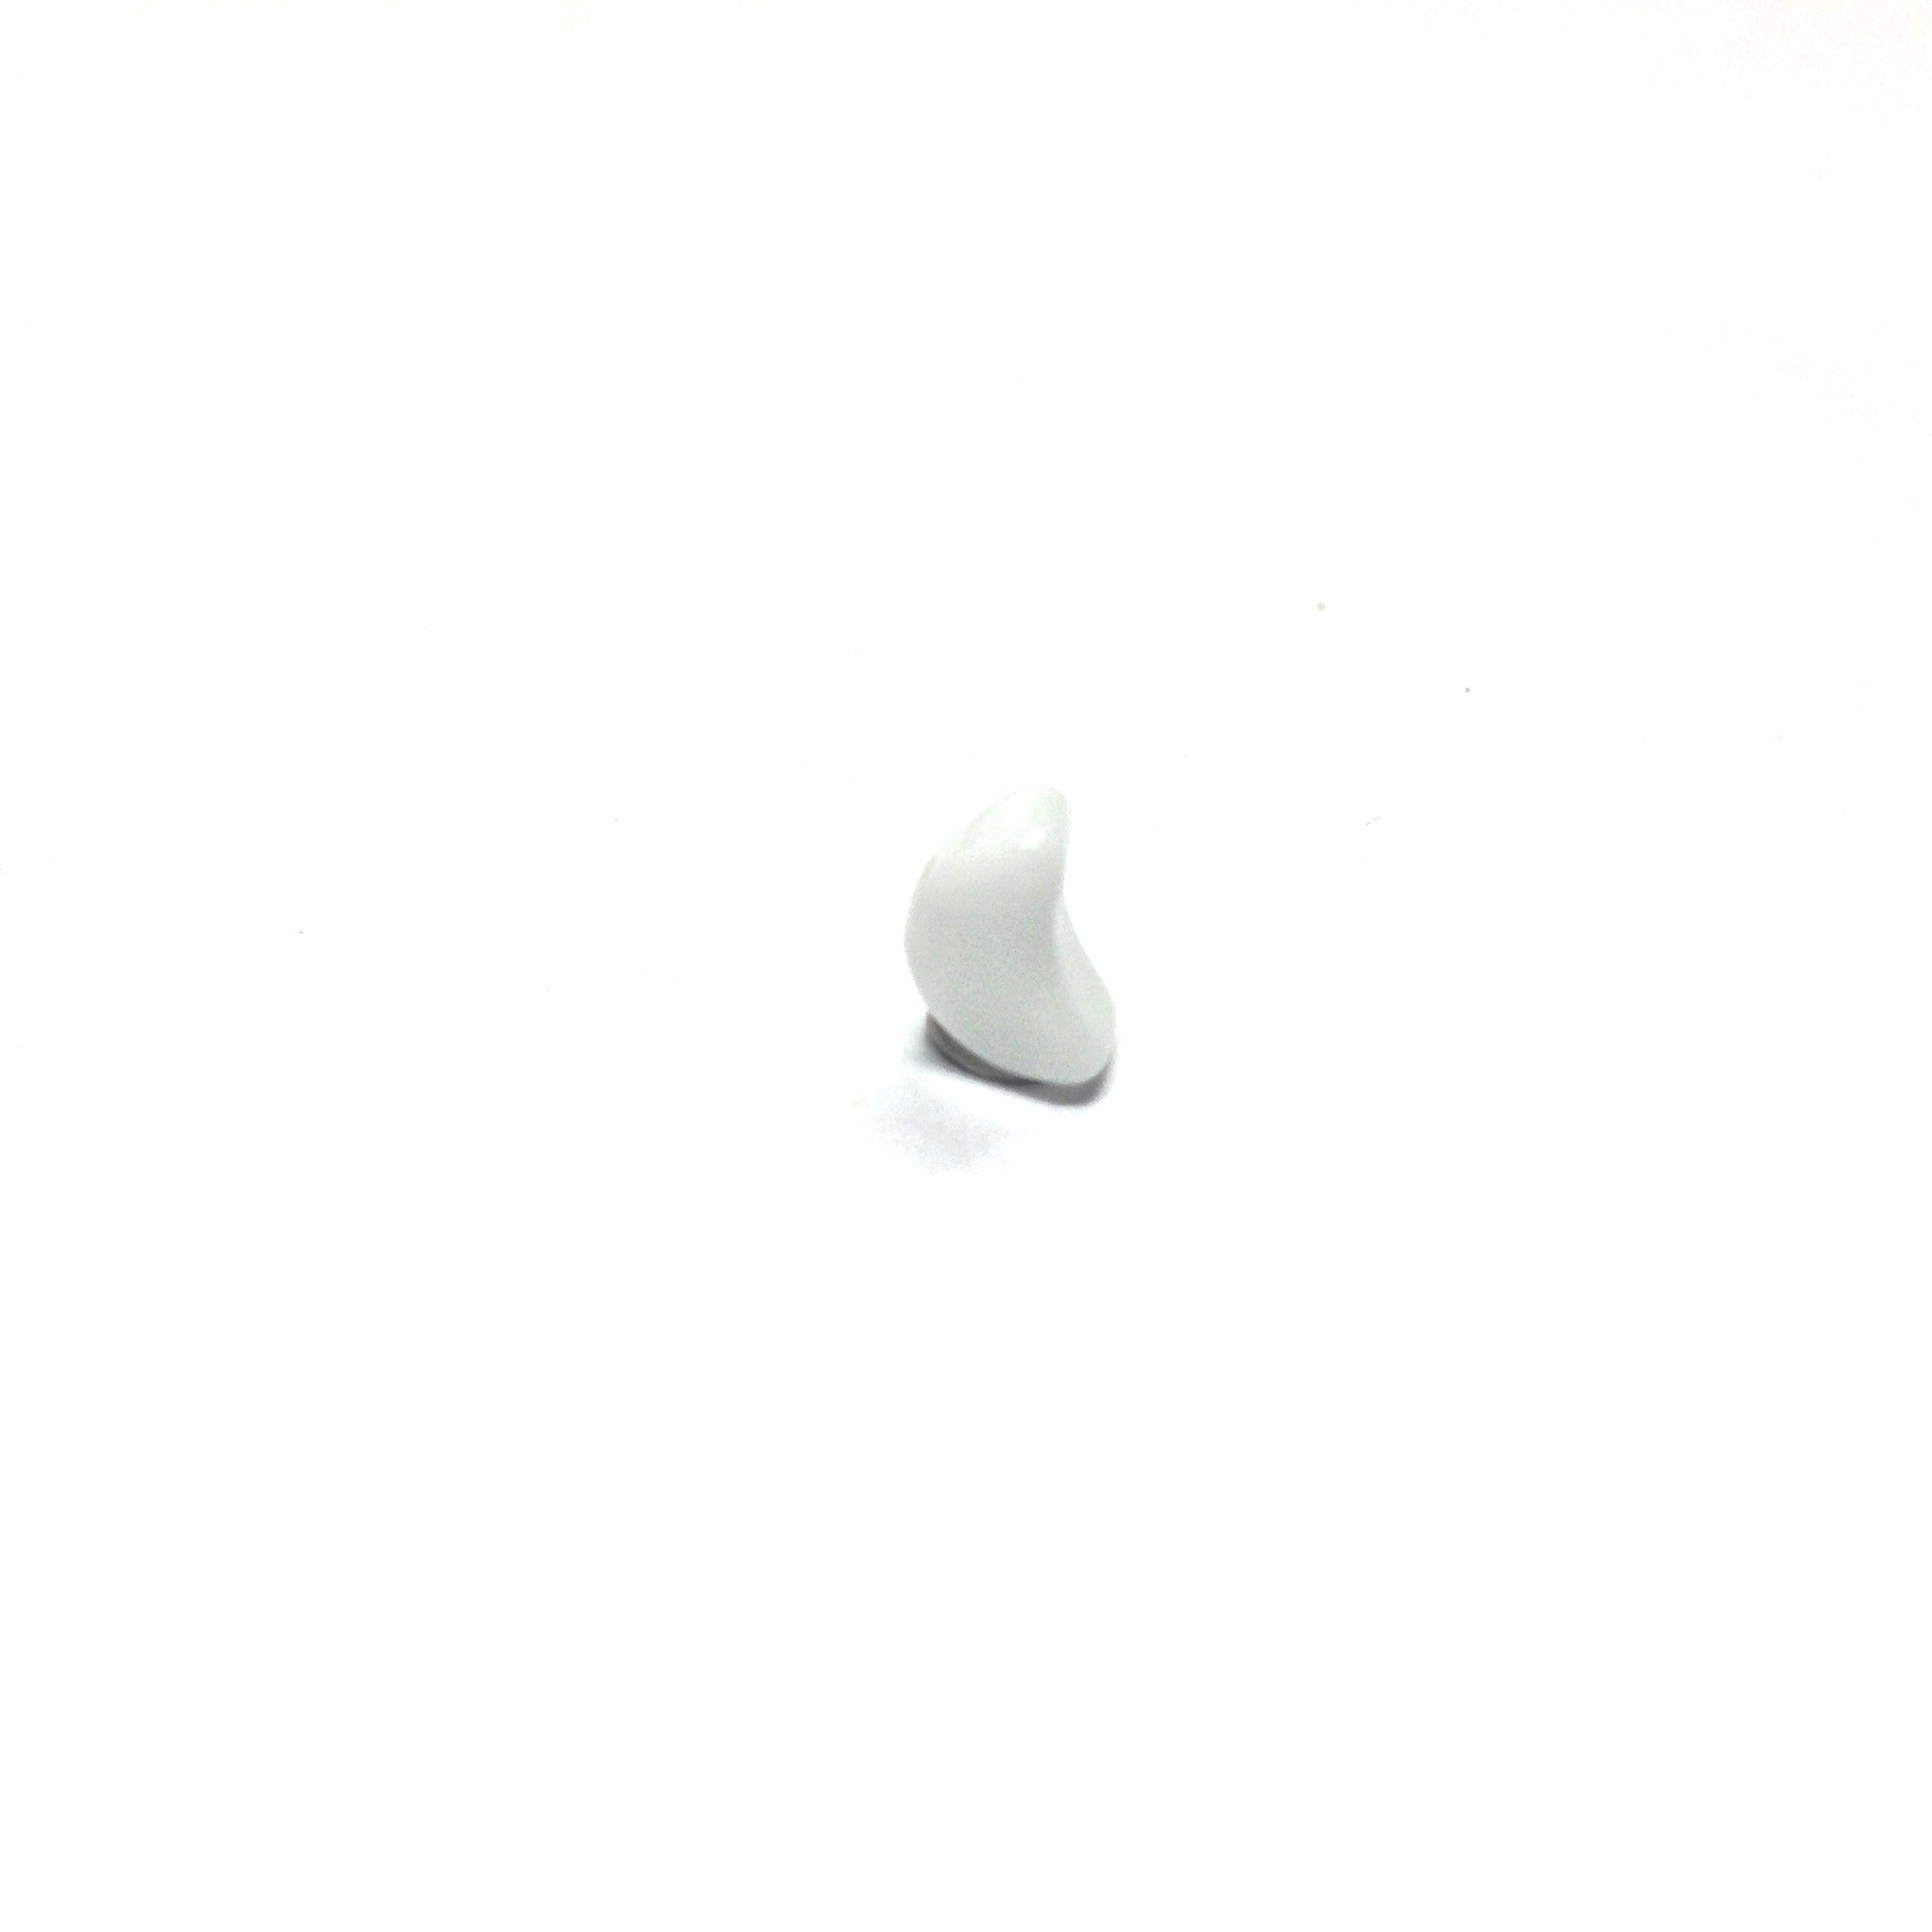 Small White Curve Bead (144 pieces)